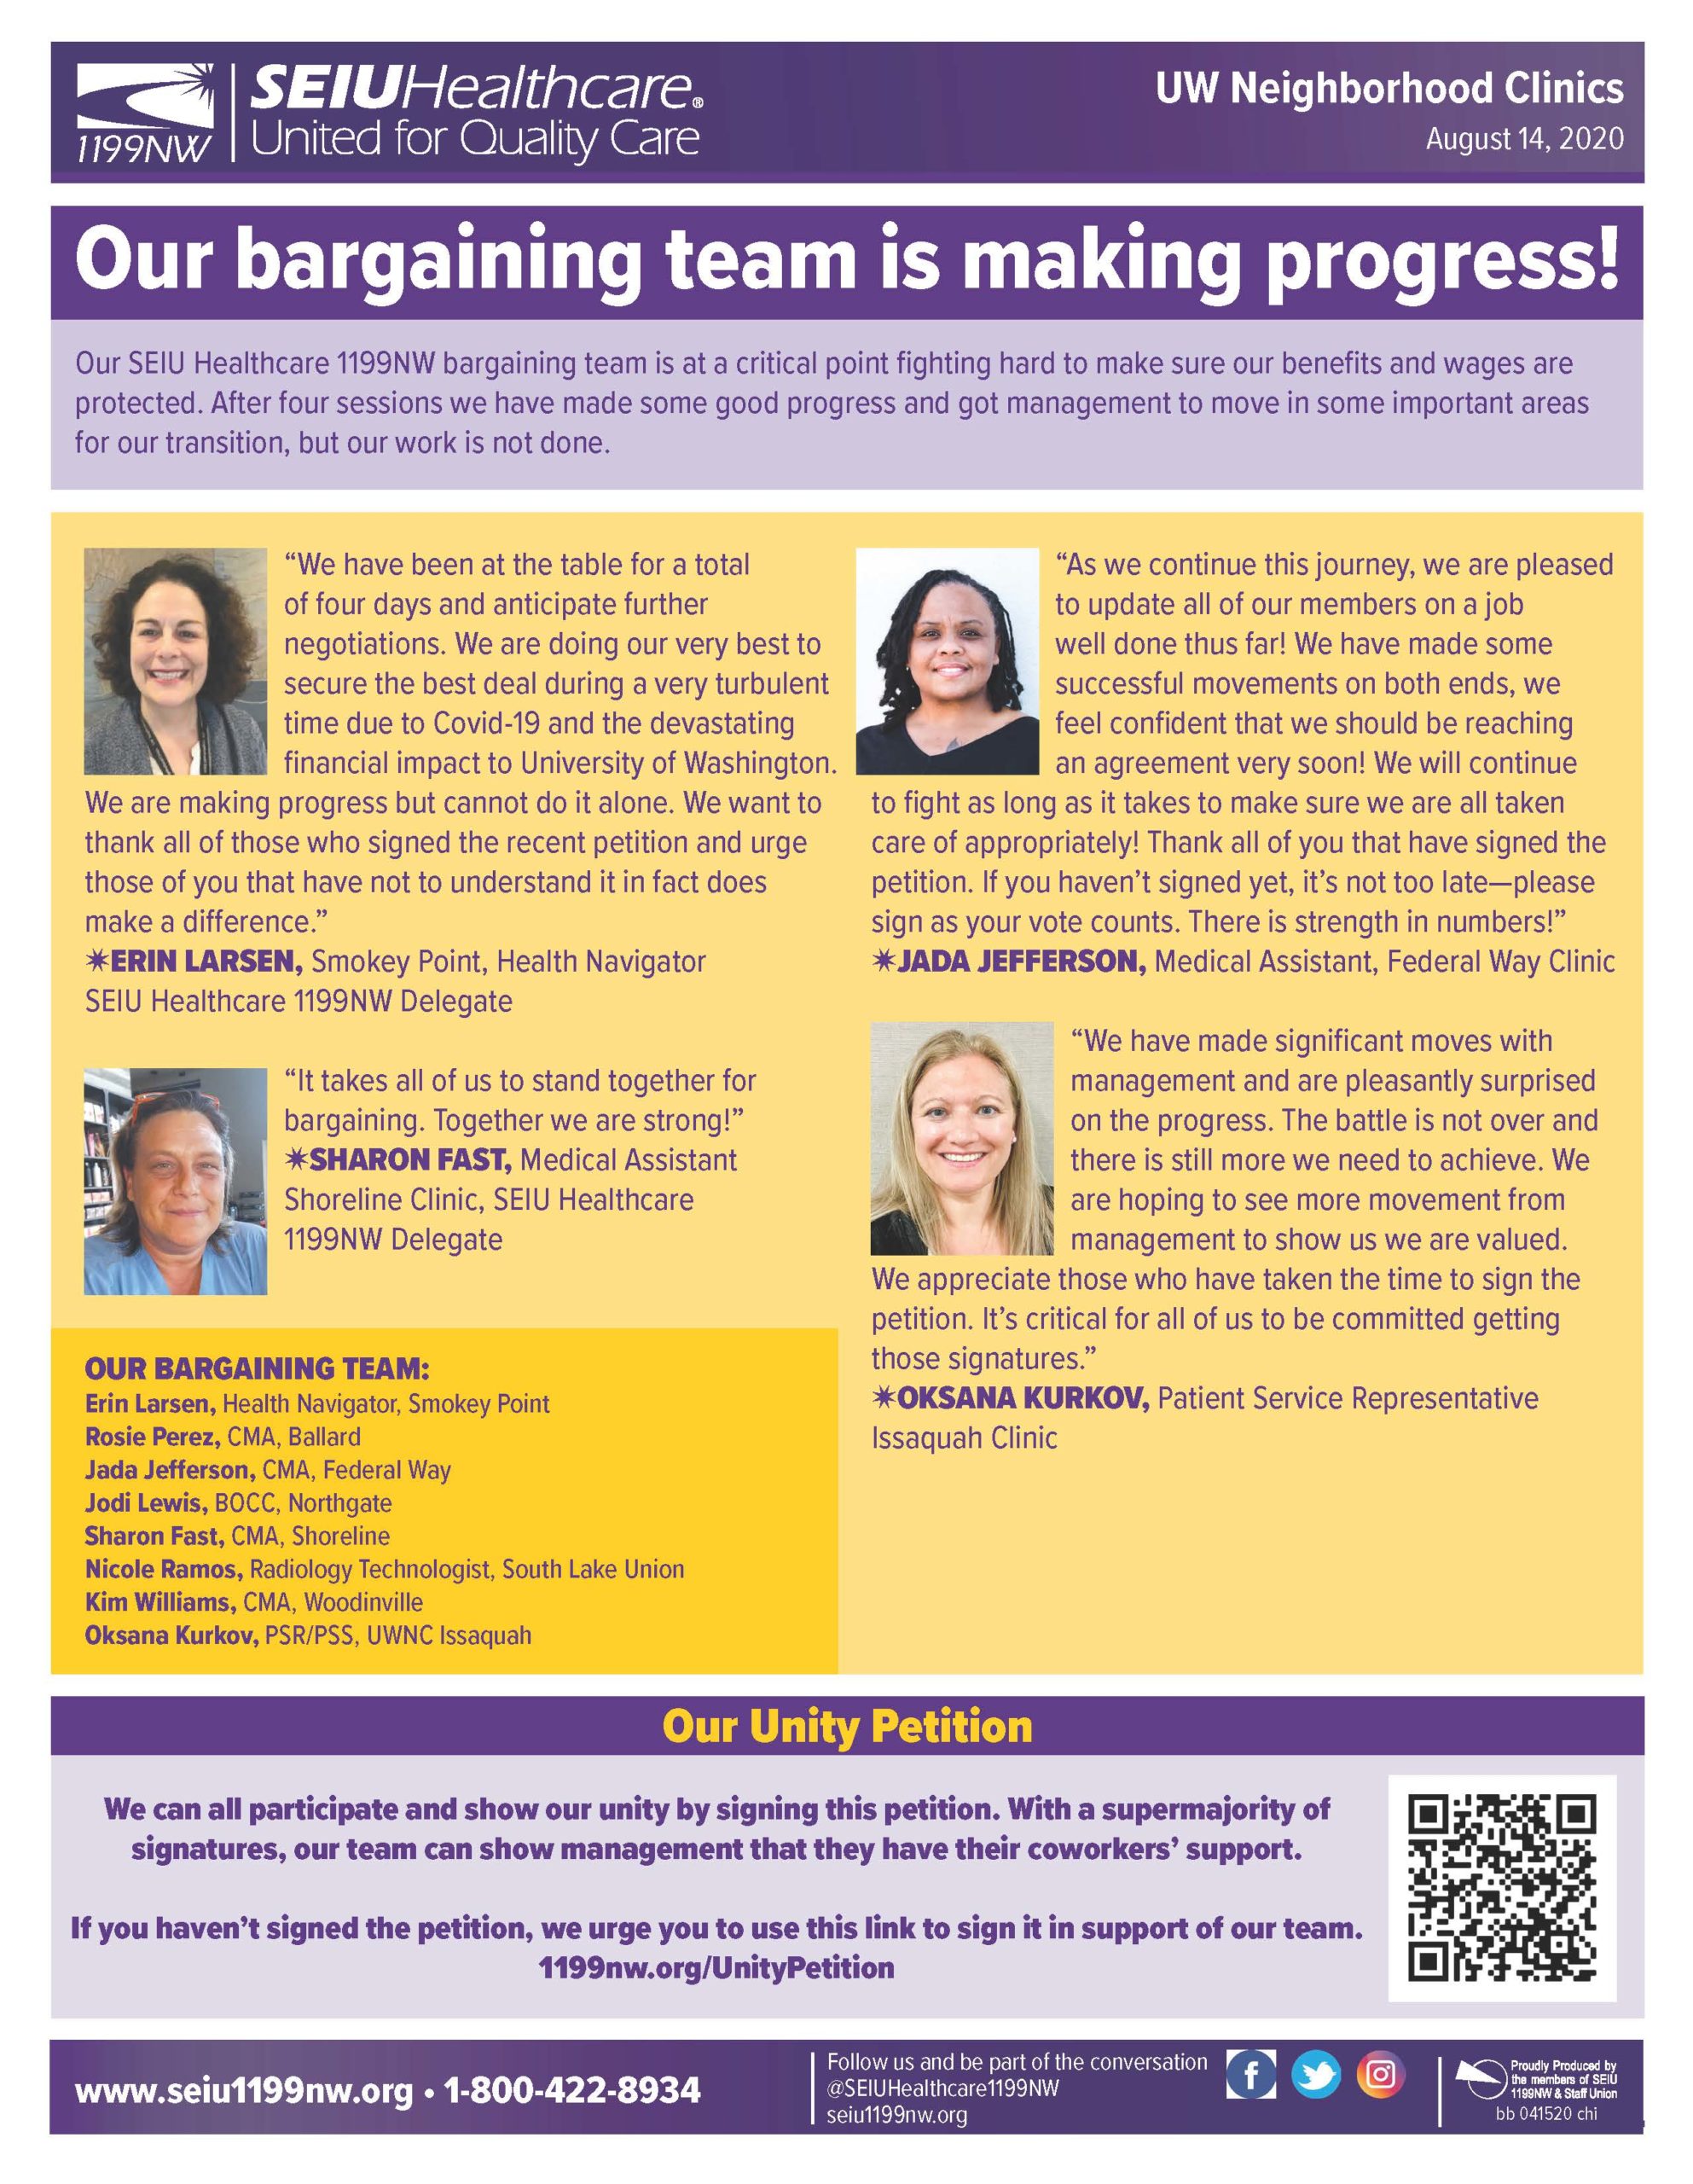 Our bargaining team is making progress!